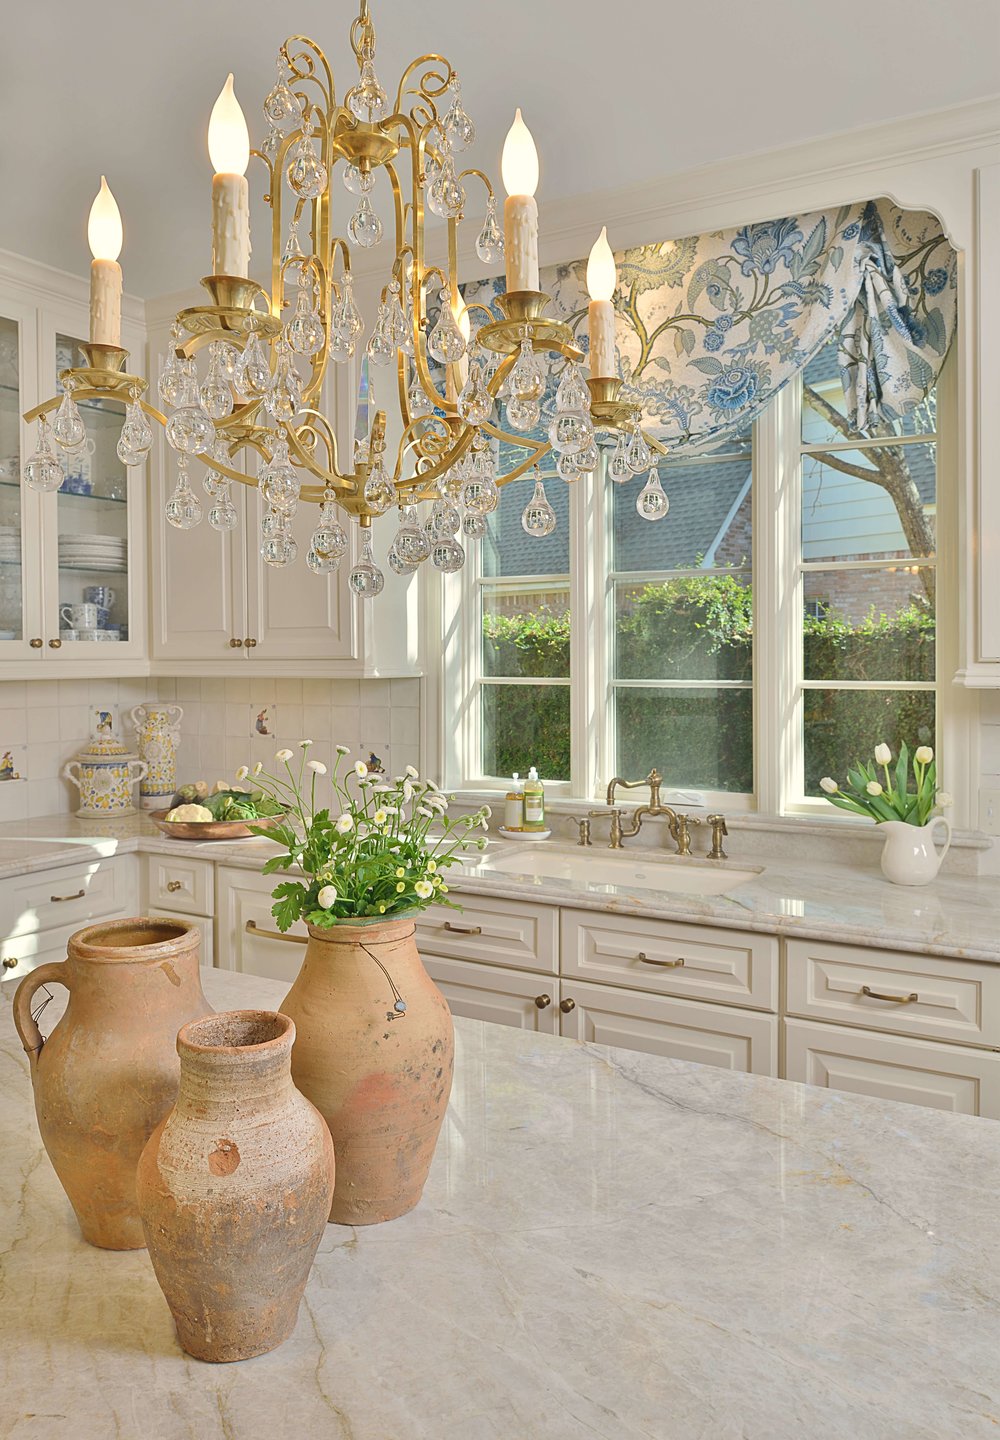 7 Considerations For Kitchen Island, Chandelier For Kitchen Island